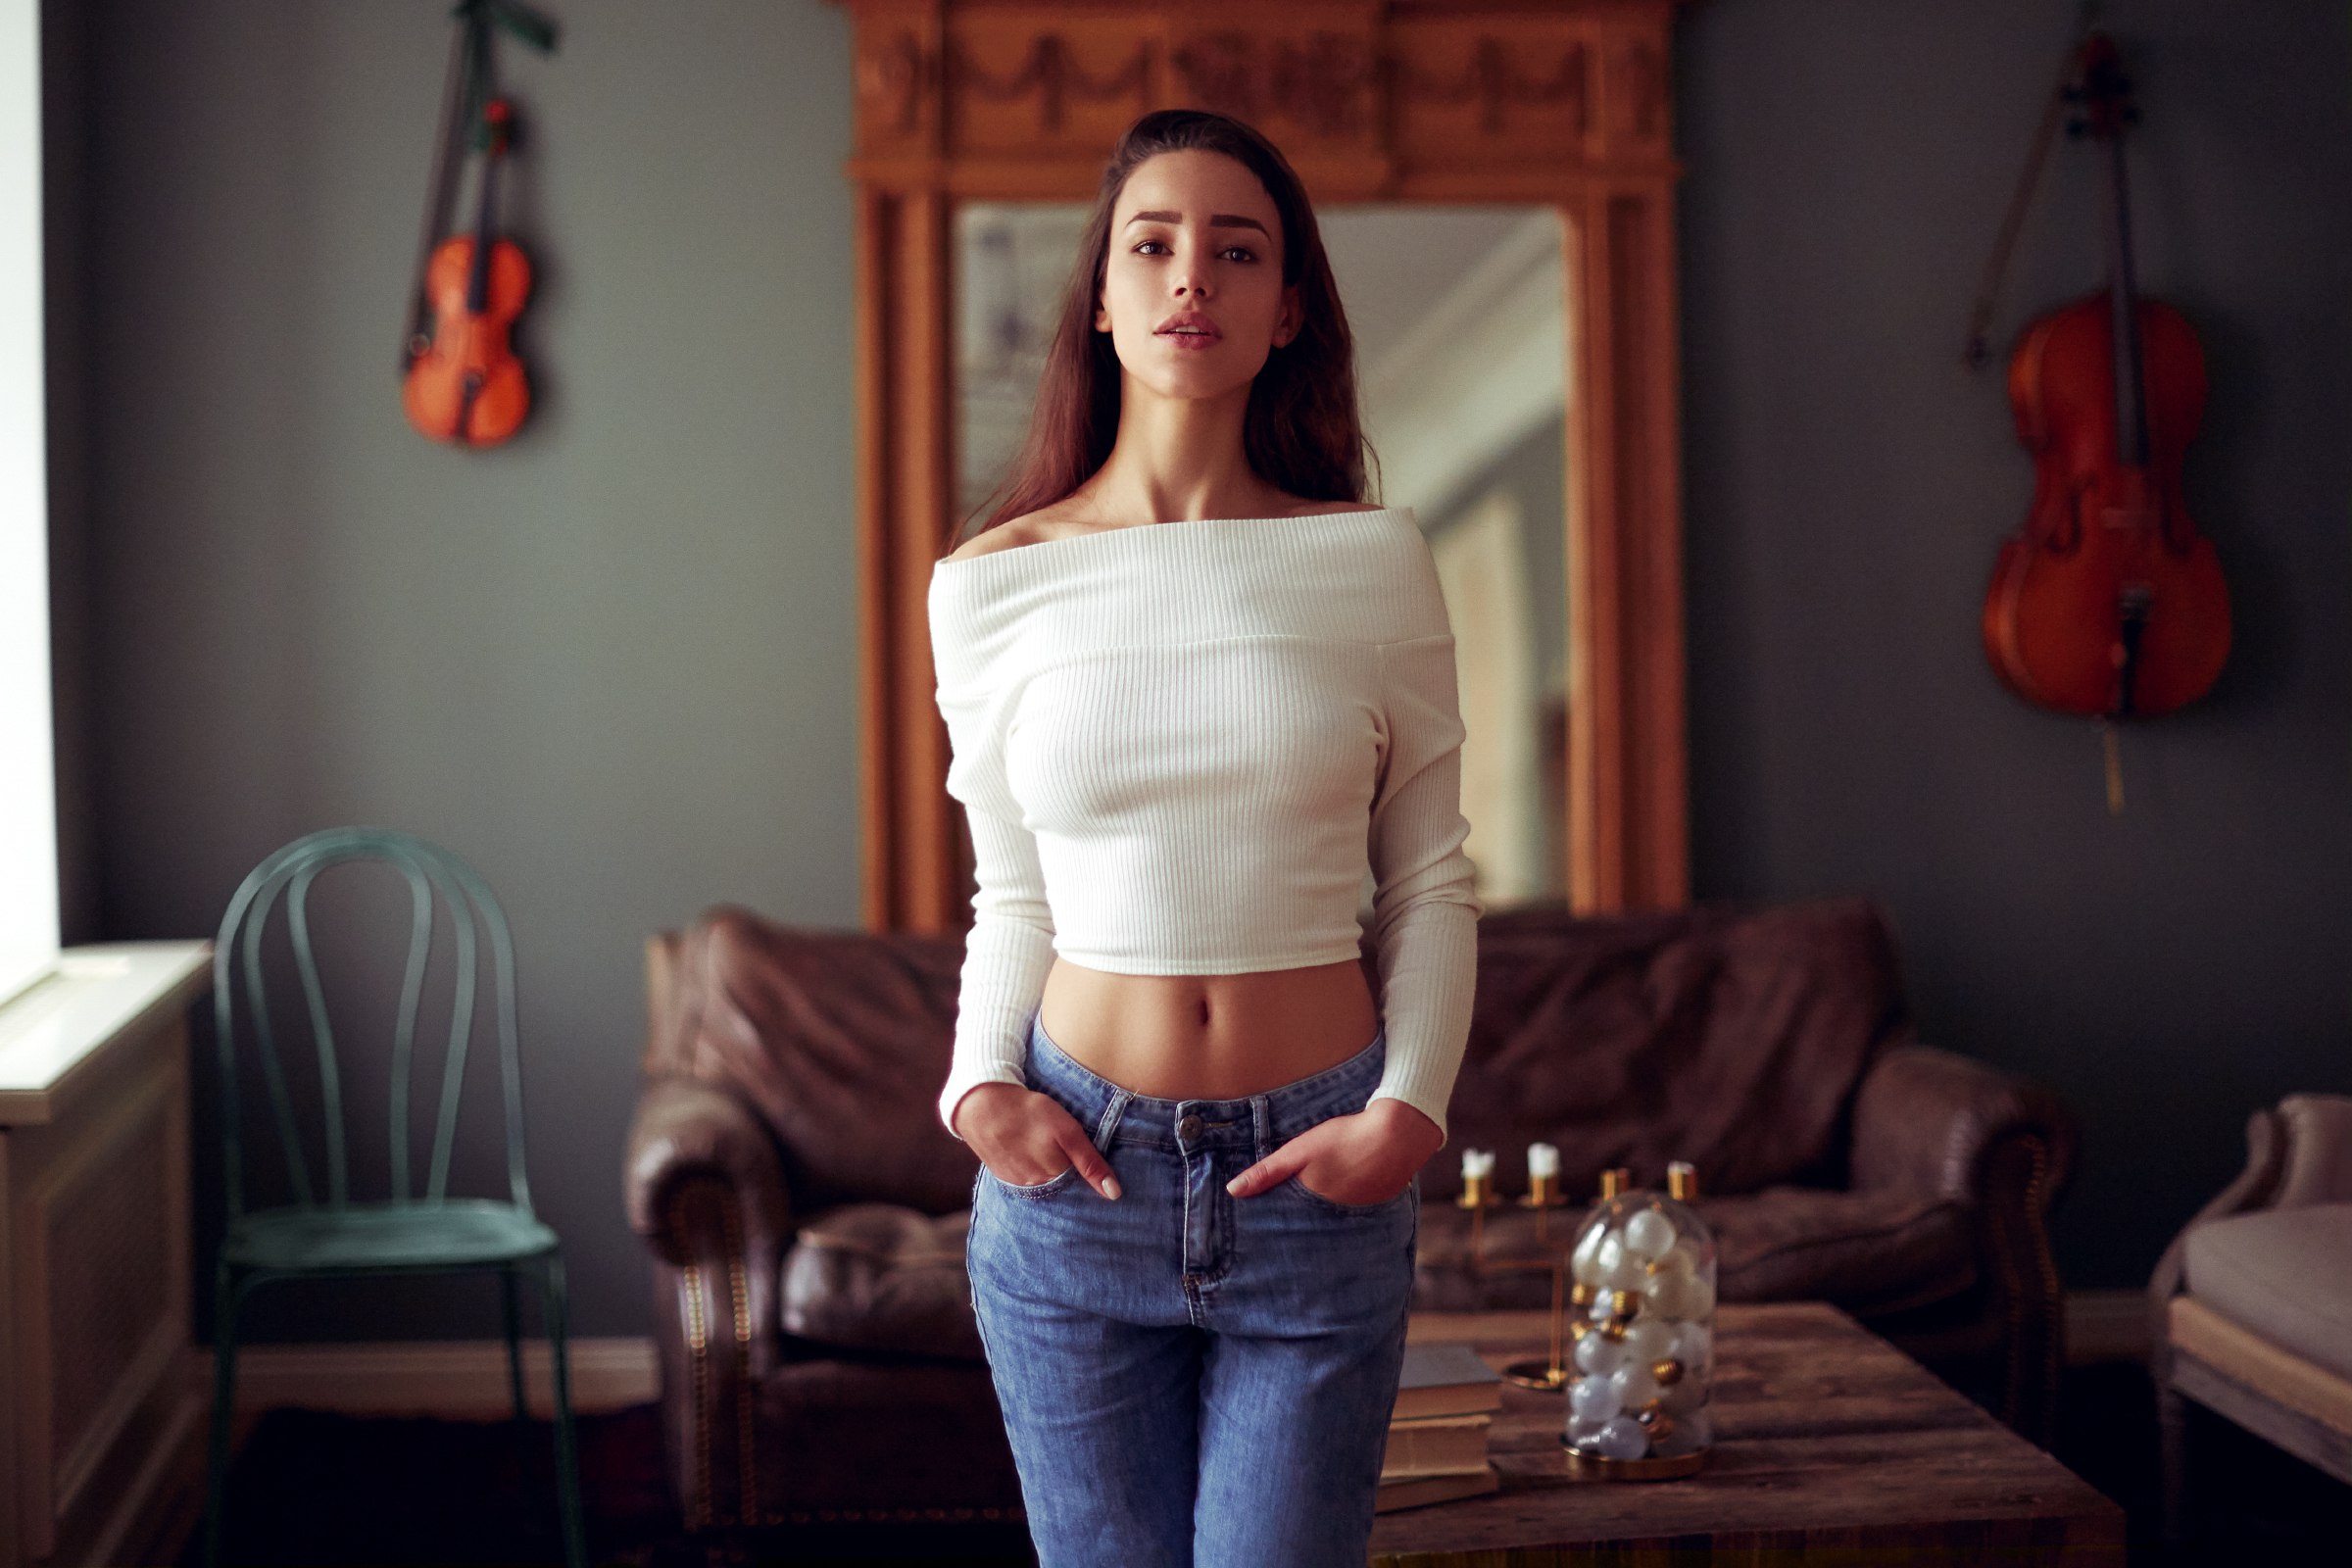 People 2400x1600 women jeans chair couch depth of field white sweater hands in pockets short tops women indoors brunette standing model makeup bare midriff